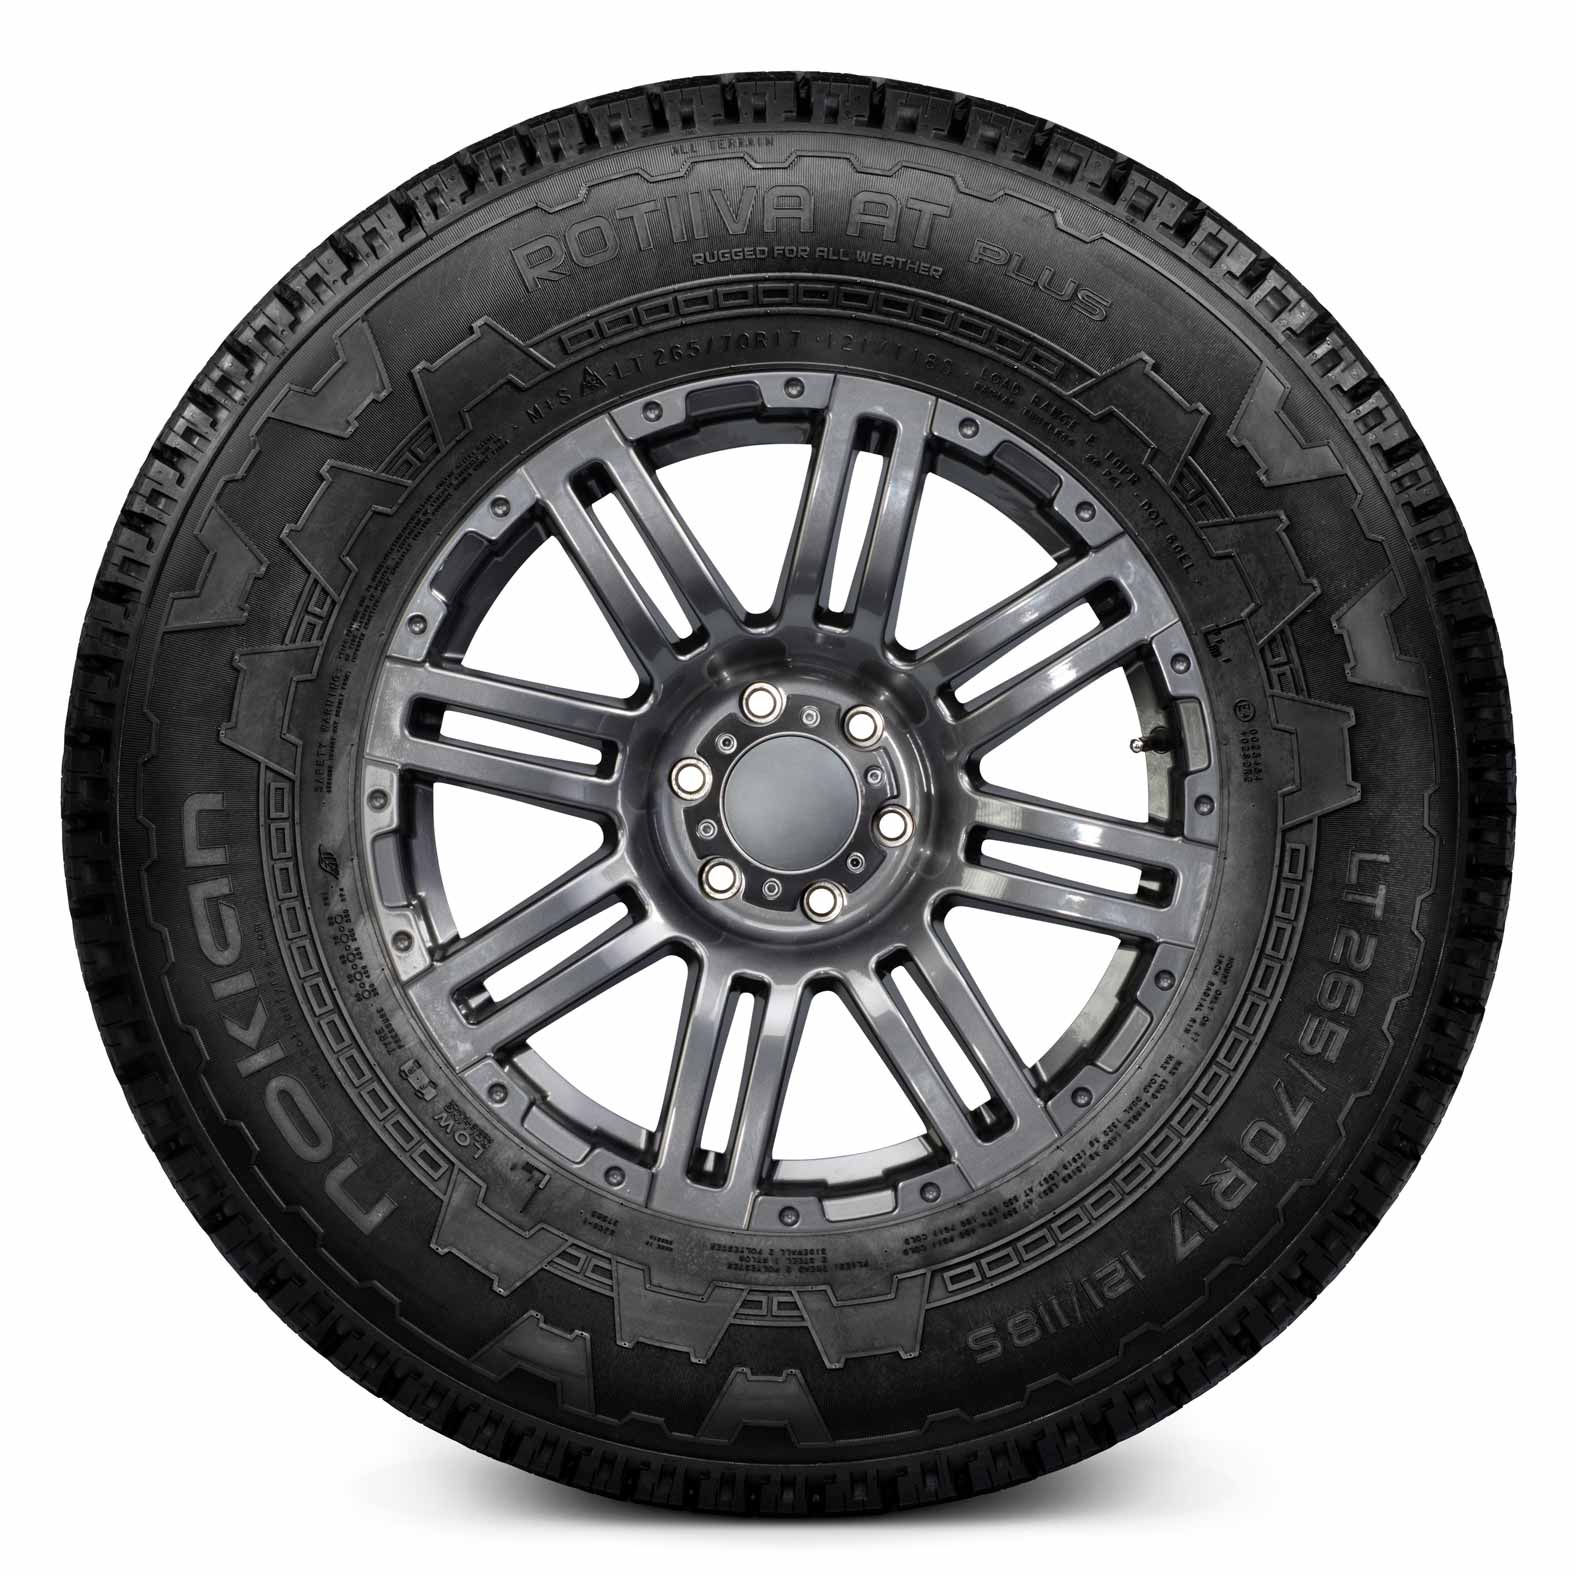 PLUS Tire Tires for AT Rotiiva Kal All-Terrain | Nokian